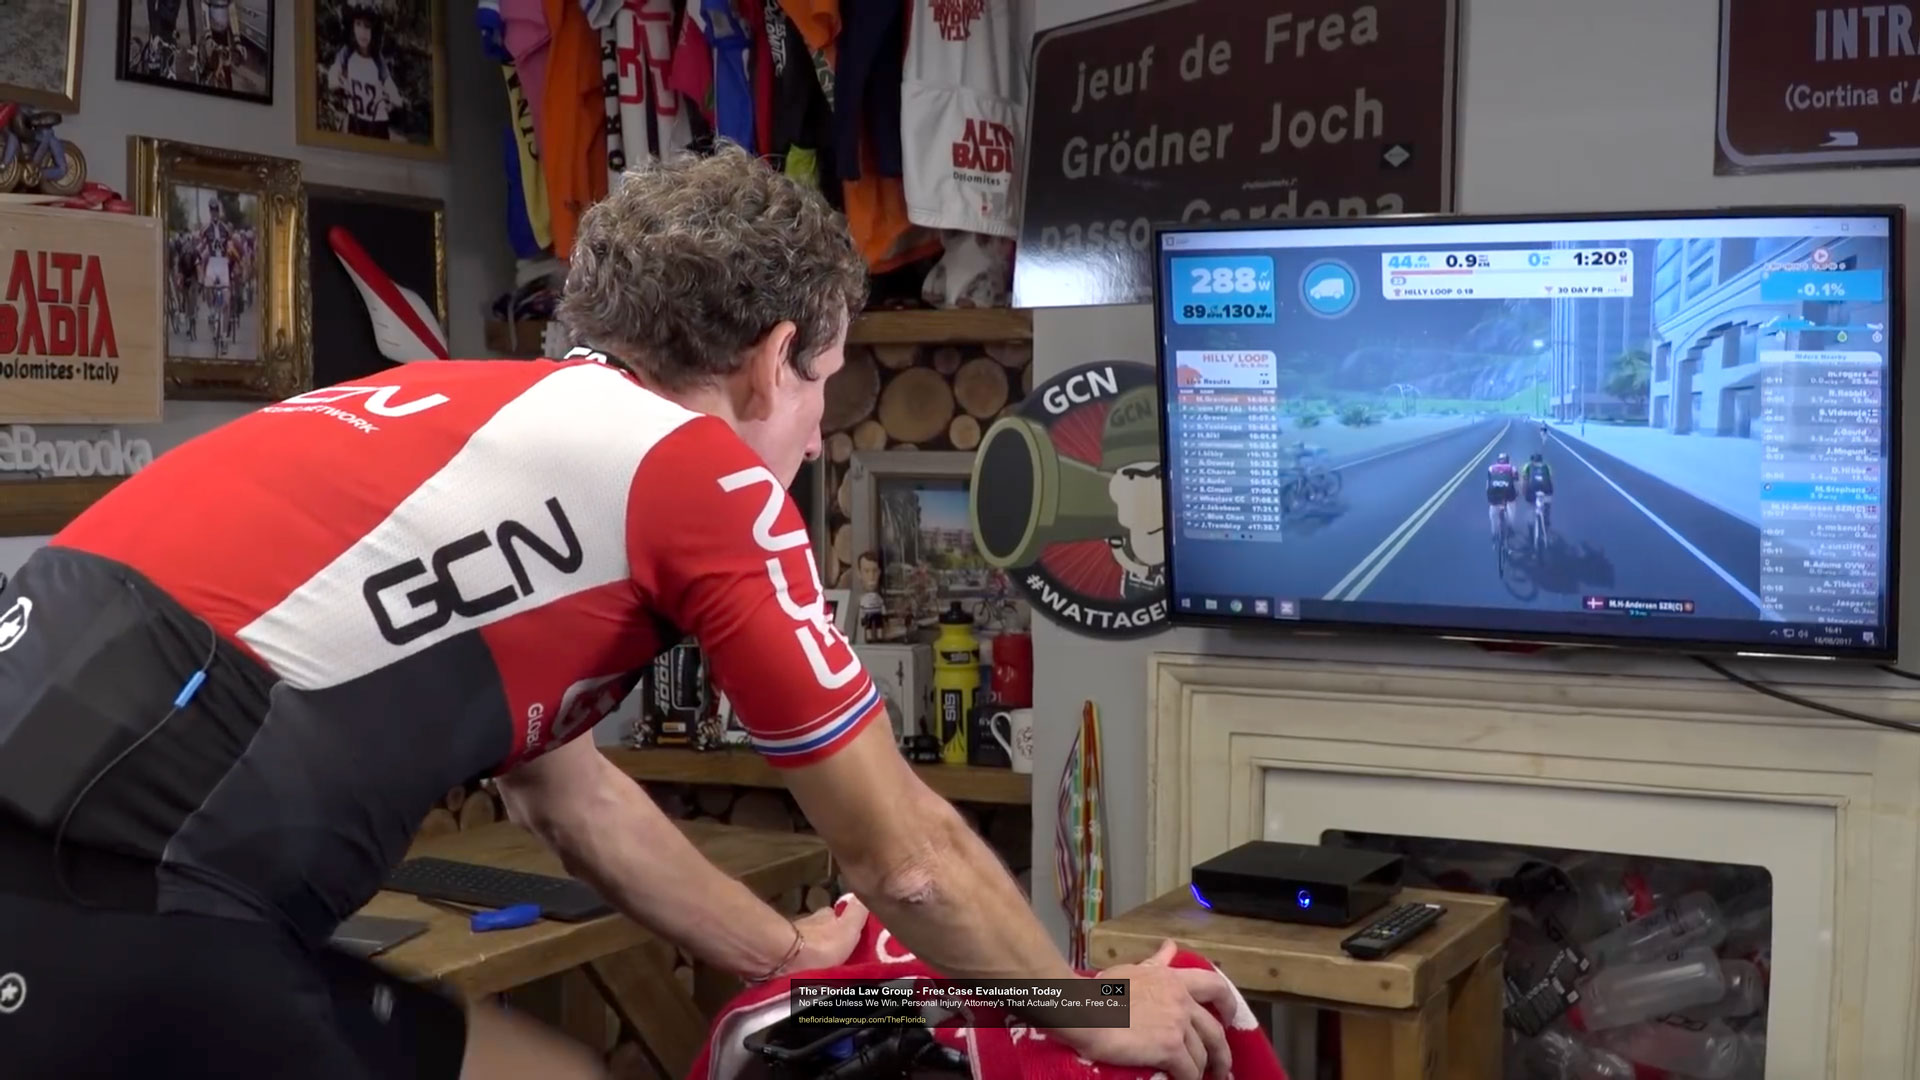 How To Use Zwift | Zwift For Beginners